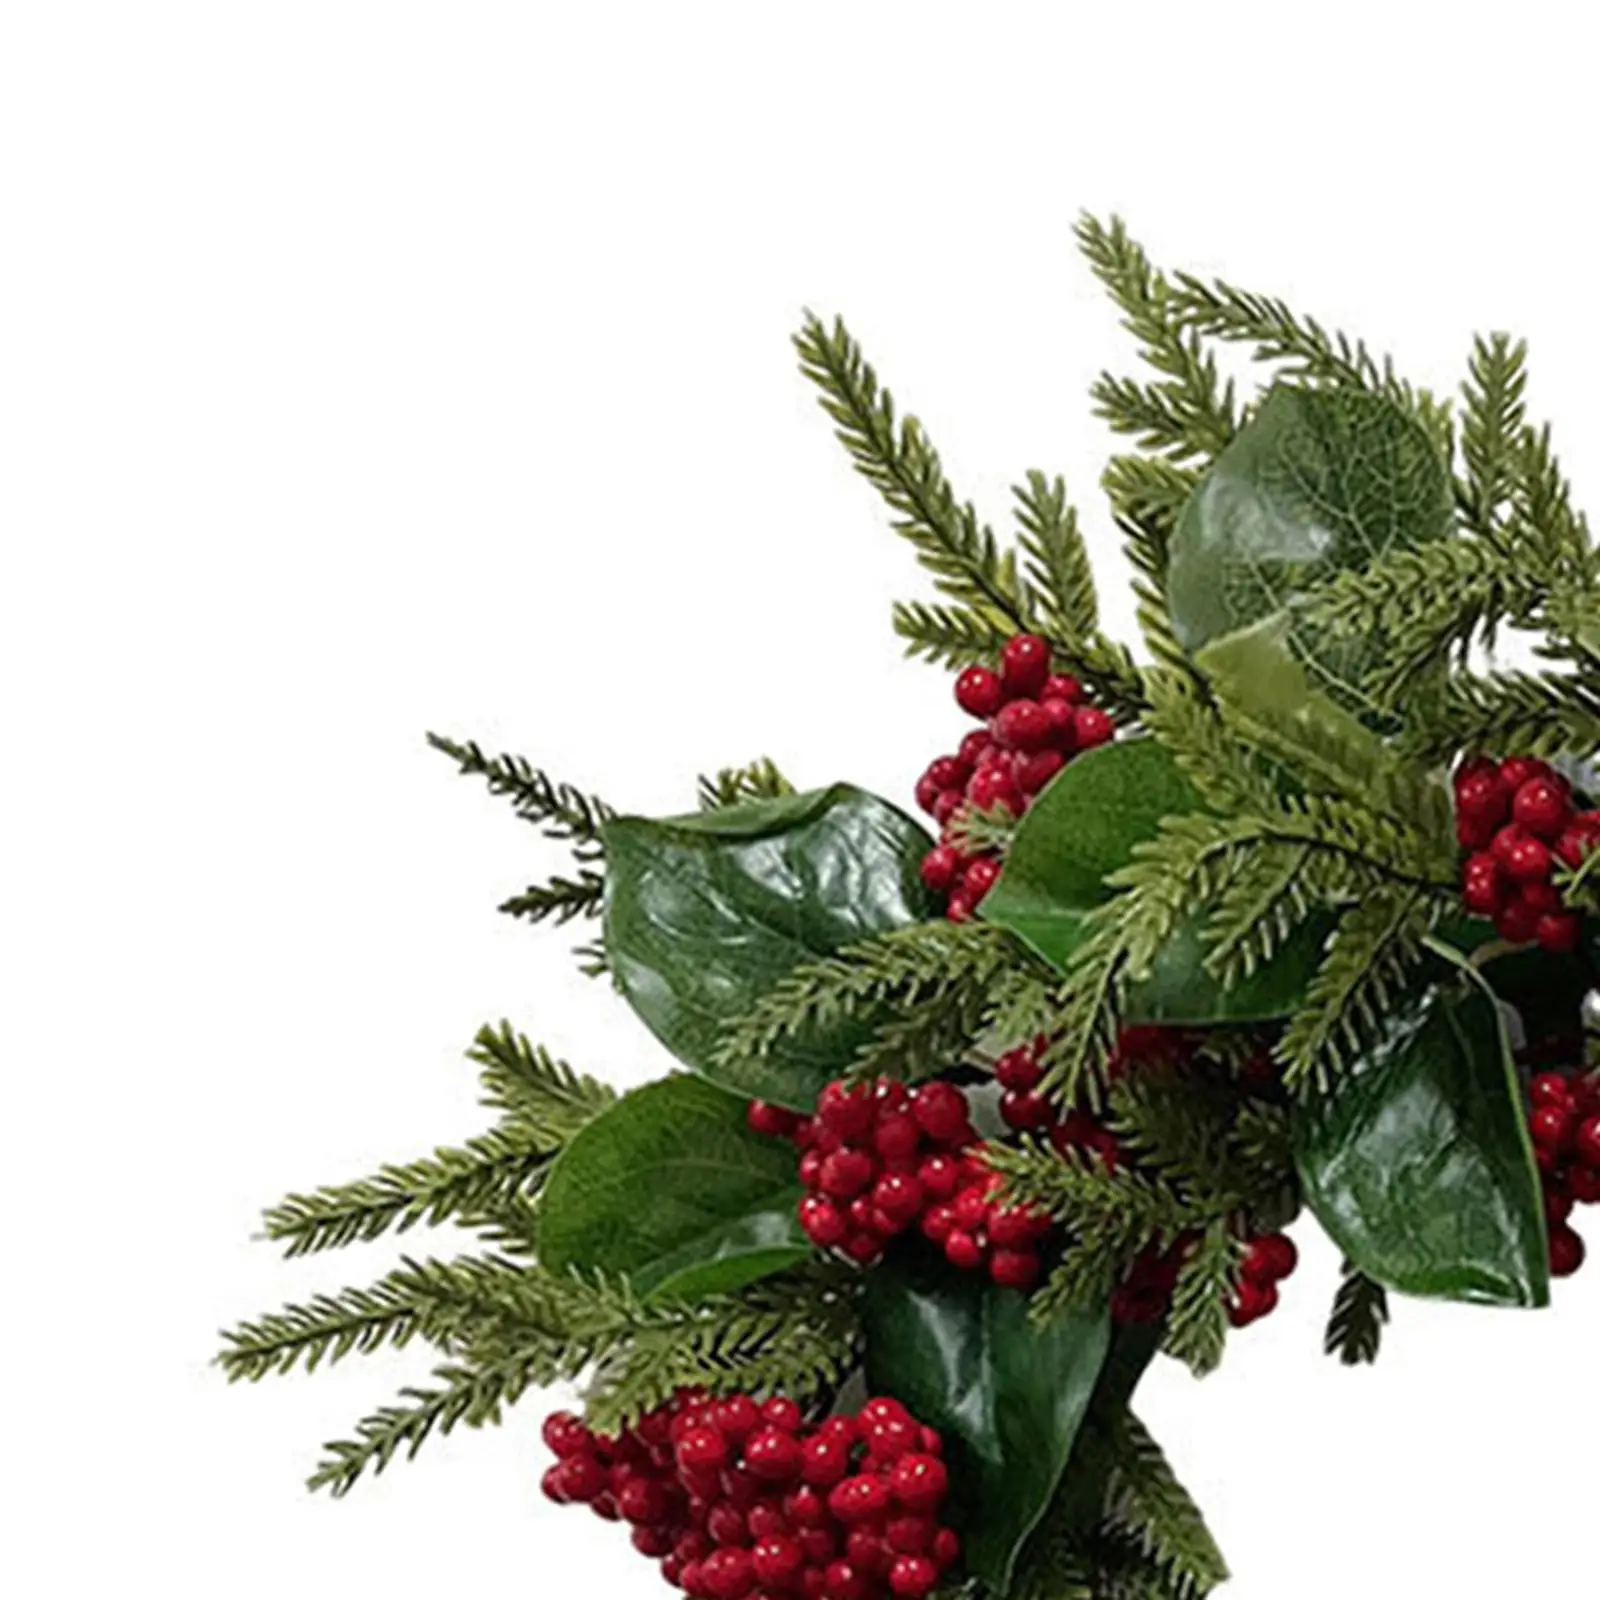 Christmas Wreath Winter Wreath Front Door Wreath Garland with Red Berries Artificial Floral Wreath for Wedding Wall Farmhouse